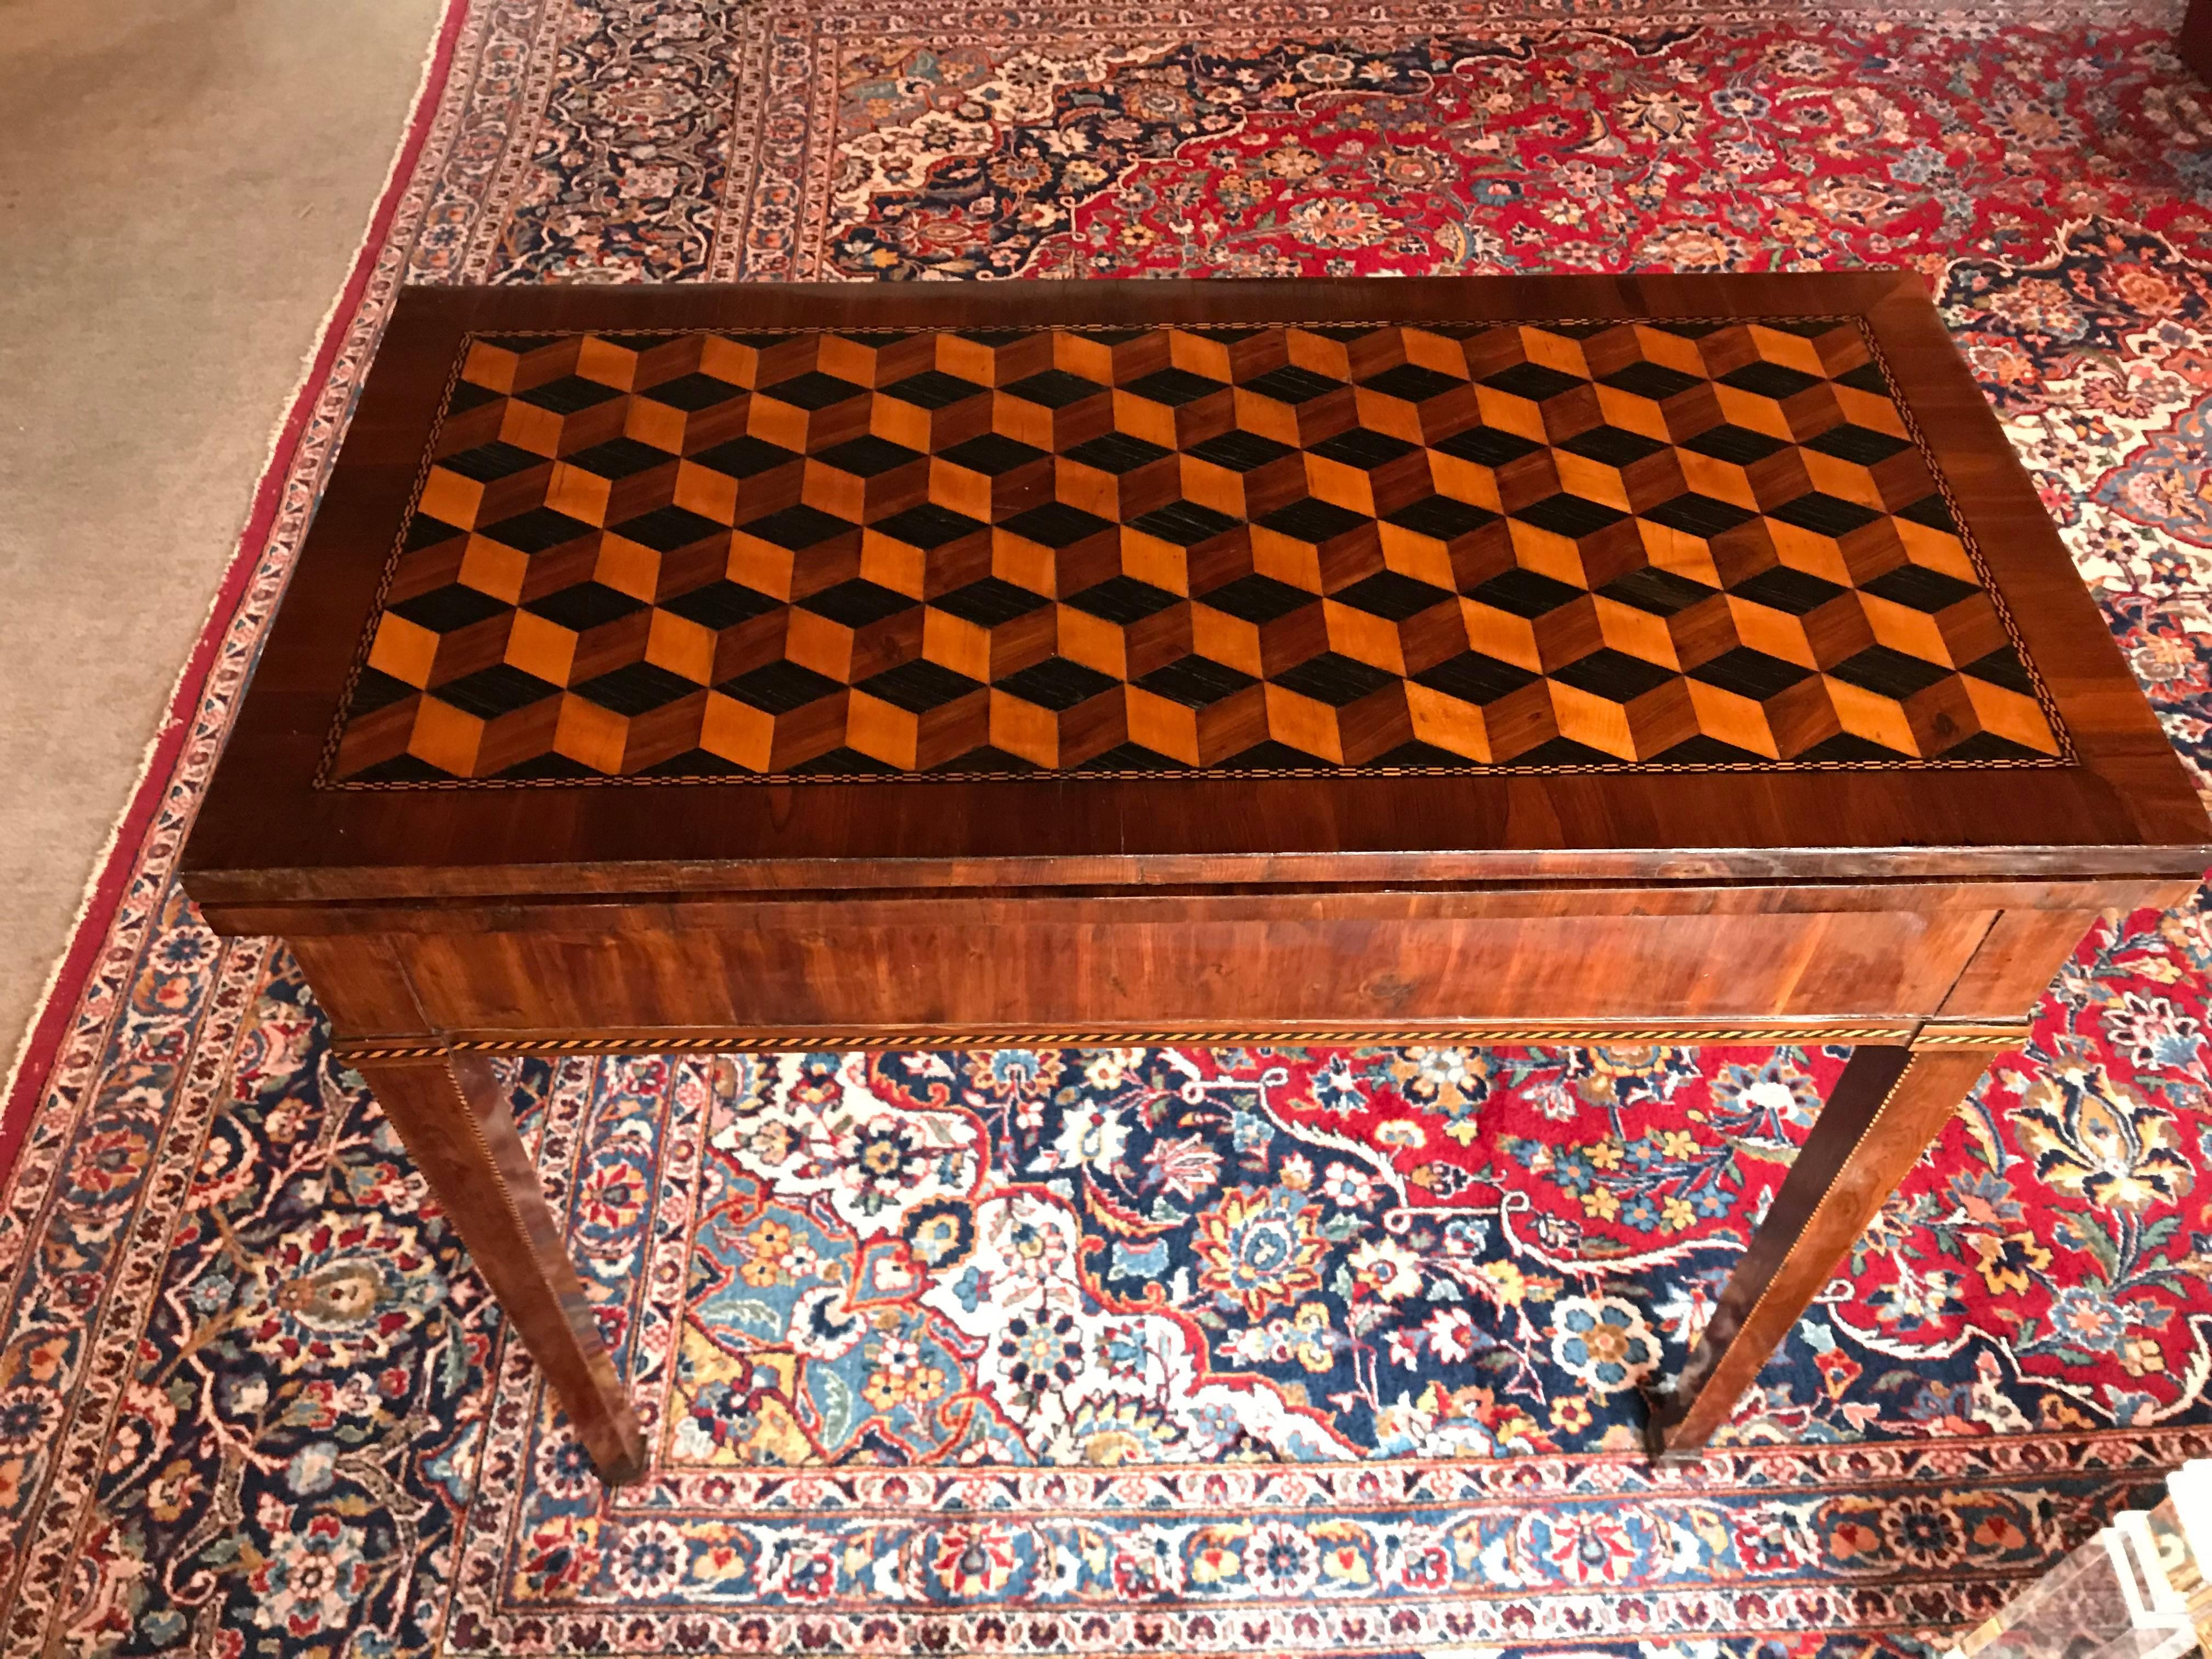 Unique 18th century Louis XVI card table, Strassburg region, king wood veneer and stunning satin wood, plum and king wood block marquetry on the top. The unfolded table top will be turned and rests on the base. The table is in good condition with a